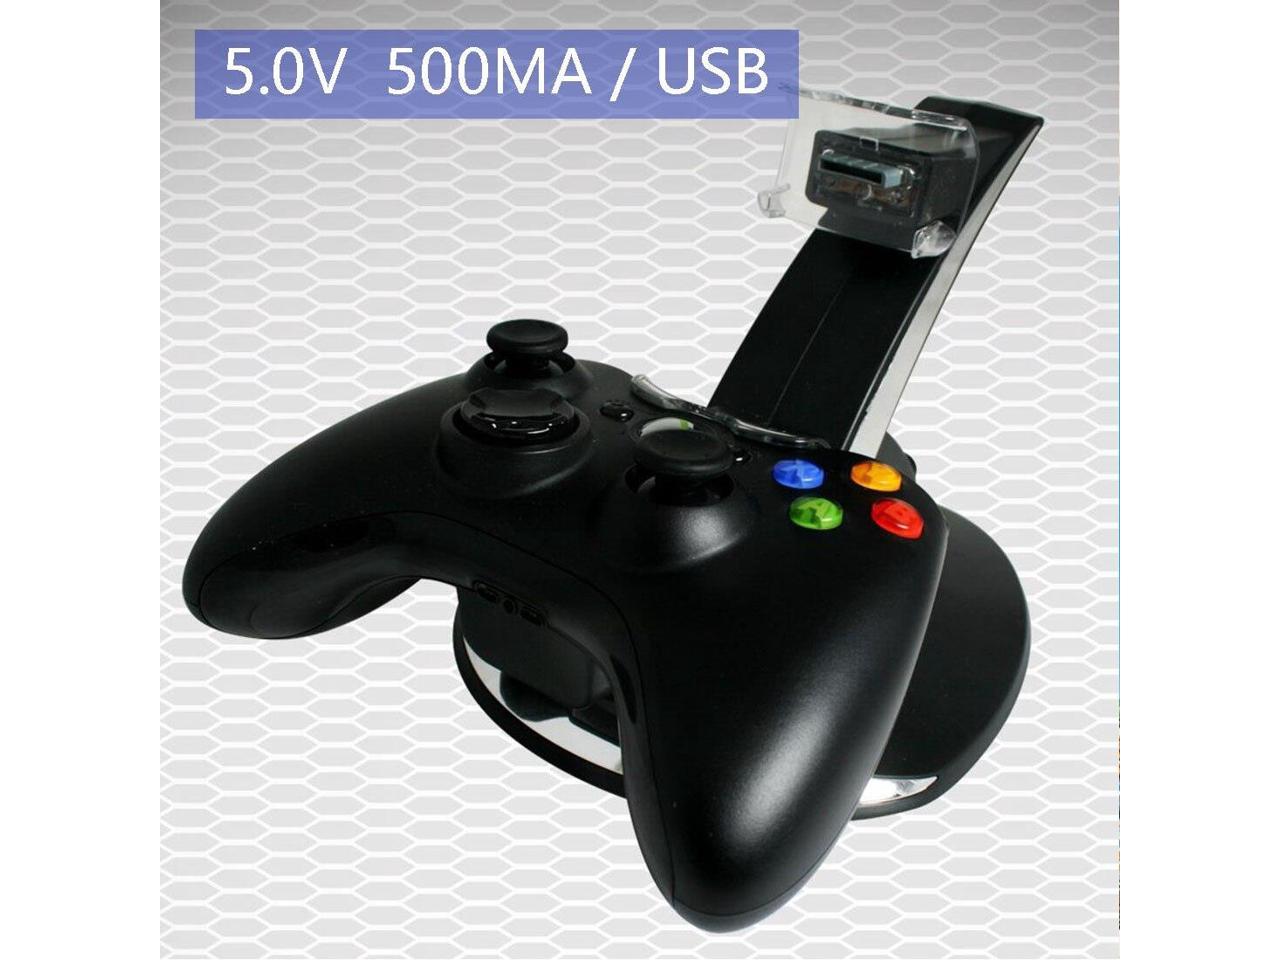 LED Dual Charger Charging Stand Dock holder Video Games for PS3 Controllers Gamepad joystick